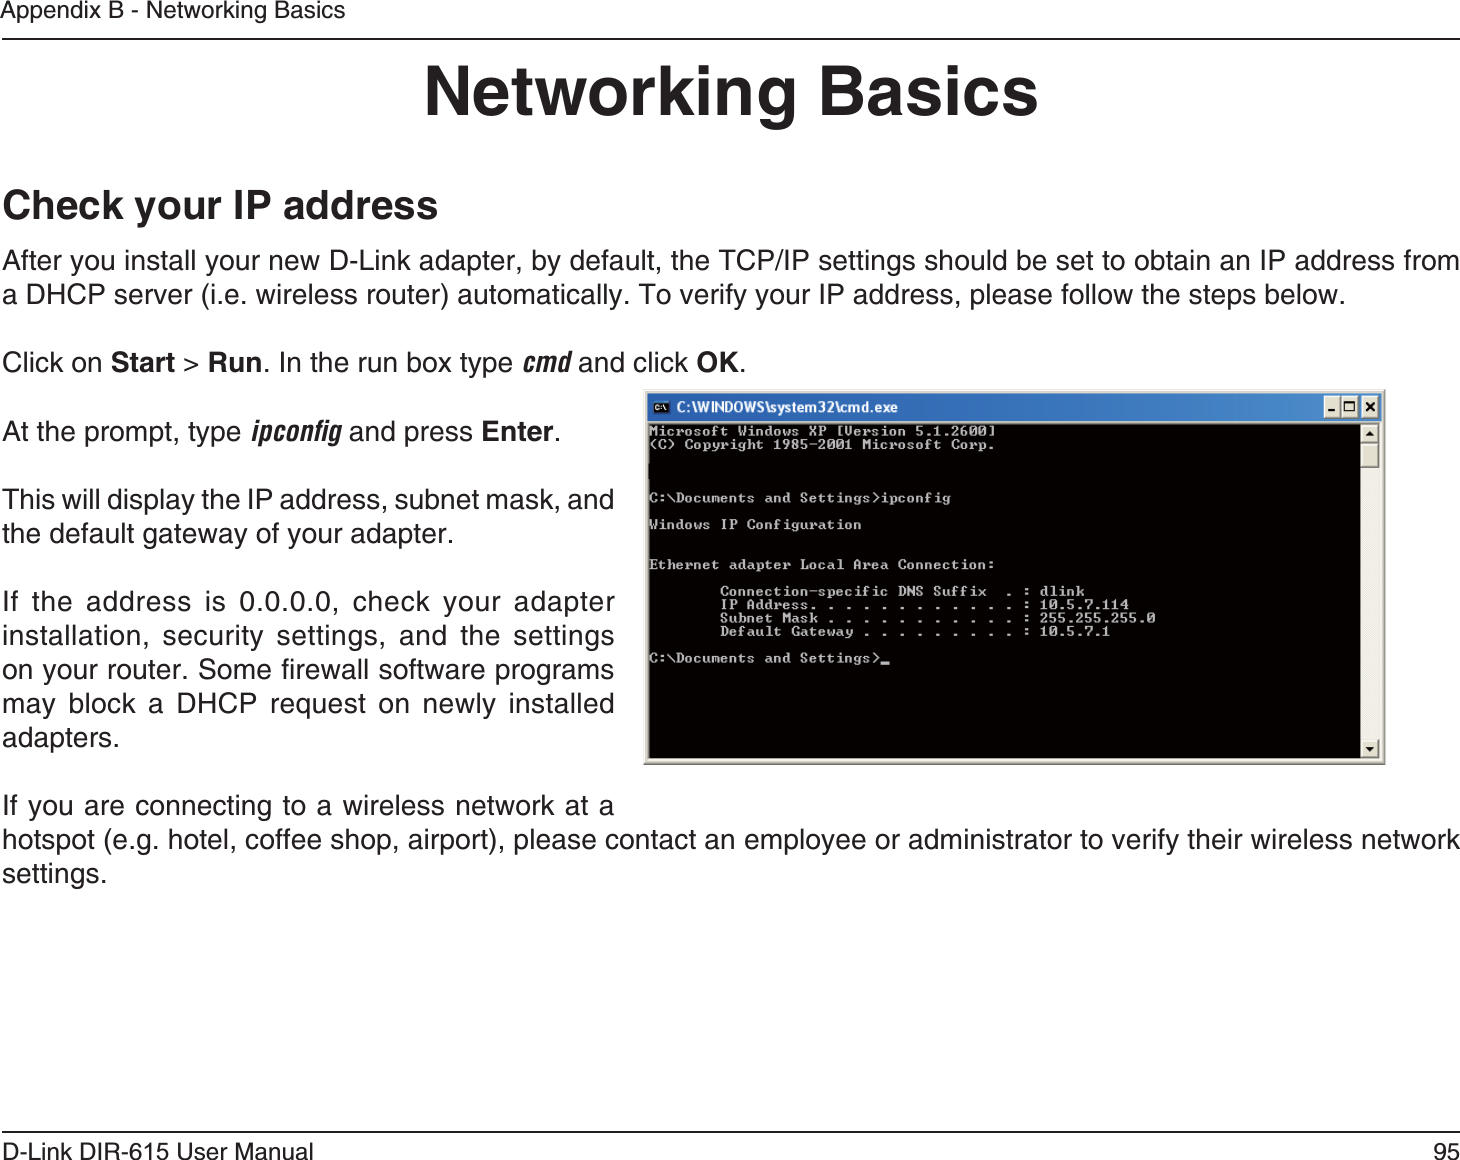 95D-Link DIR-6 User ManualAppendix B - Networking BasicsAfter you install your new D-Link adapter, by default, the TCP/IP settings should be set to obtain an IP address from a DHCP server (i.e. wireless router) automatically. To verify your IP address, please follow the steps below.Click on  &gt; . In the run box type cmd and click .At the prompt, type ipconﬁg and press .This will display the IP address, subnet mask, and the default gateway of your adapter.If the address is 0.0.0.0, check your adapter installation, security settings, and the settings on your router. Some firewall software programs may block a DHCP request on newly installed adapters. If you are connecting to a wireless network at a hotspot (e.g. hotel, coffee shop, airport), please contact an employee or administrator to verify their wireless network settings.